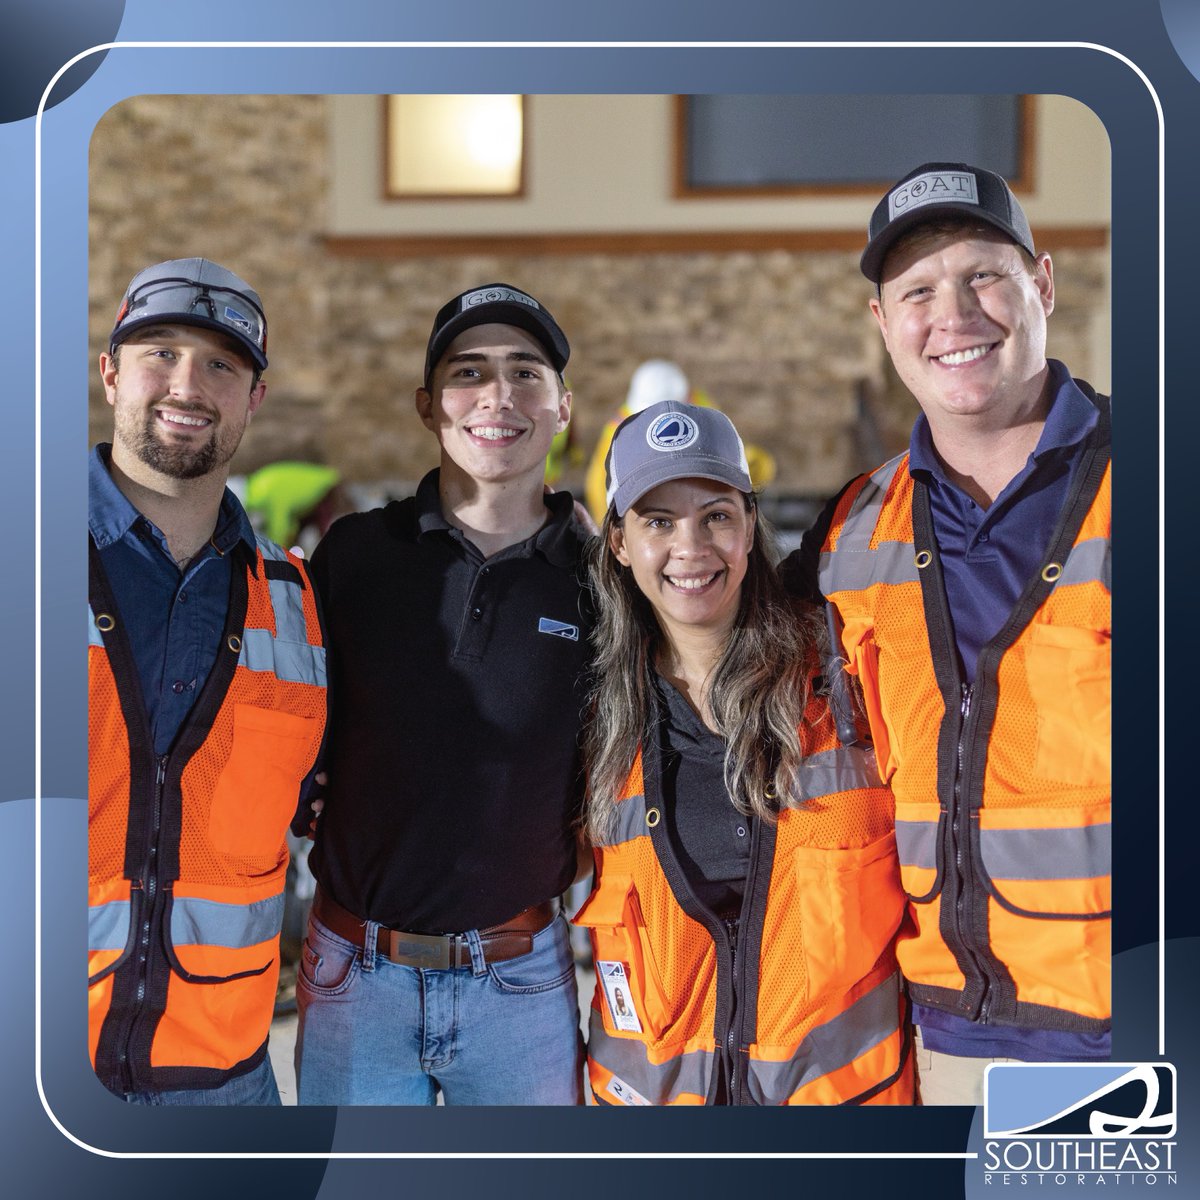 We're proud to have such a great team! The joy is contagious as we work with all our hearts, making every restoration experience exceptional.

#SoutheastRestoration #teamwork #GOATculture #restorationexperts #restoringlives #repairingproperty